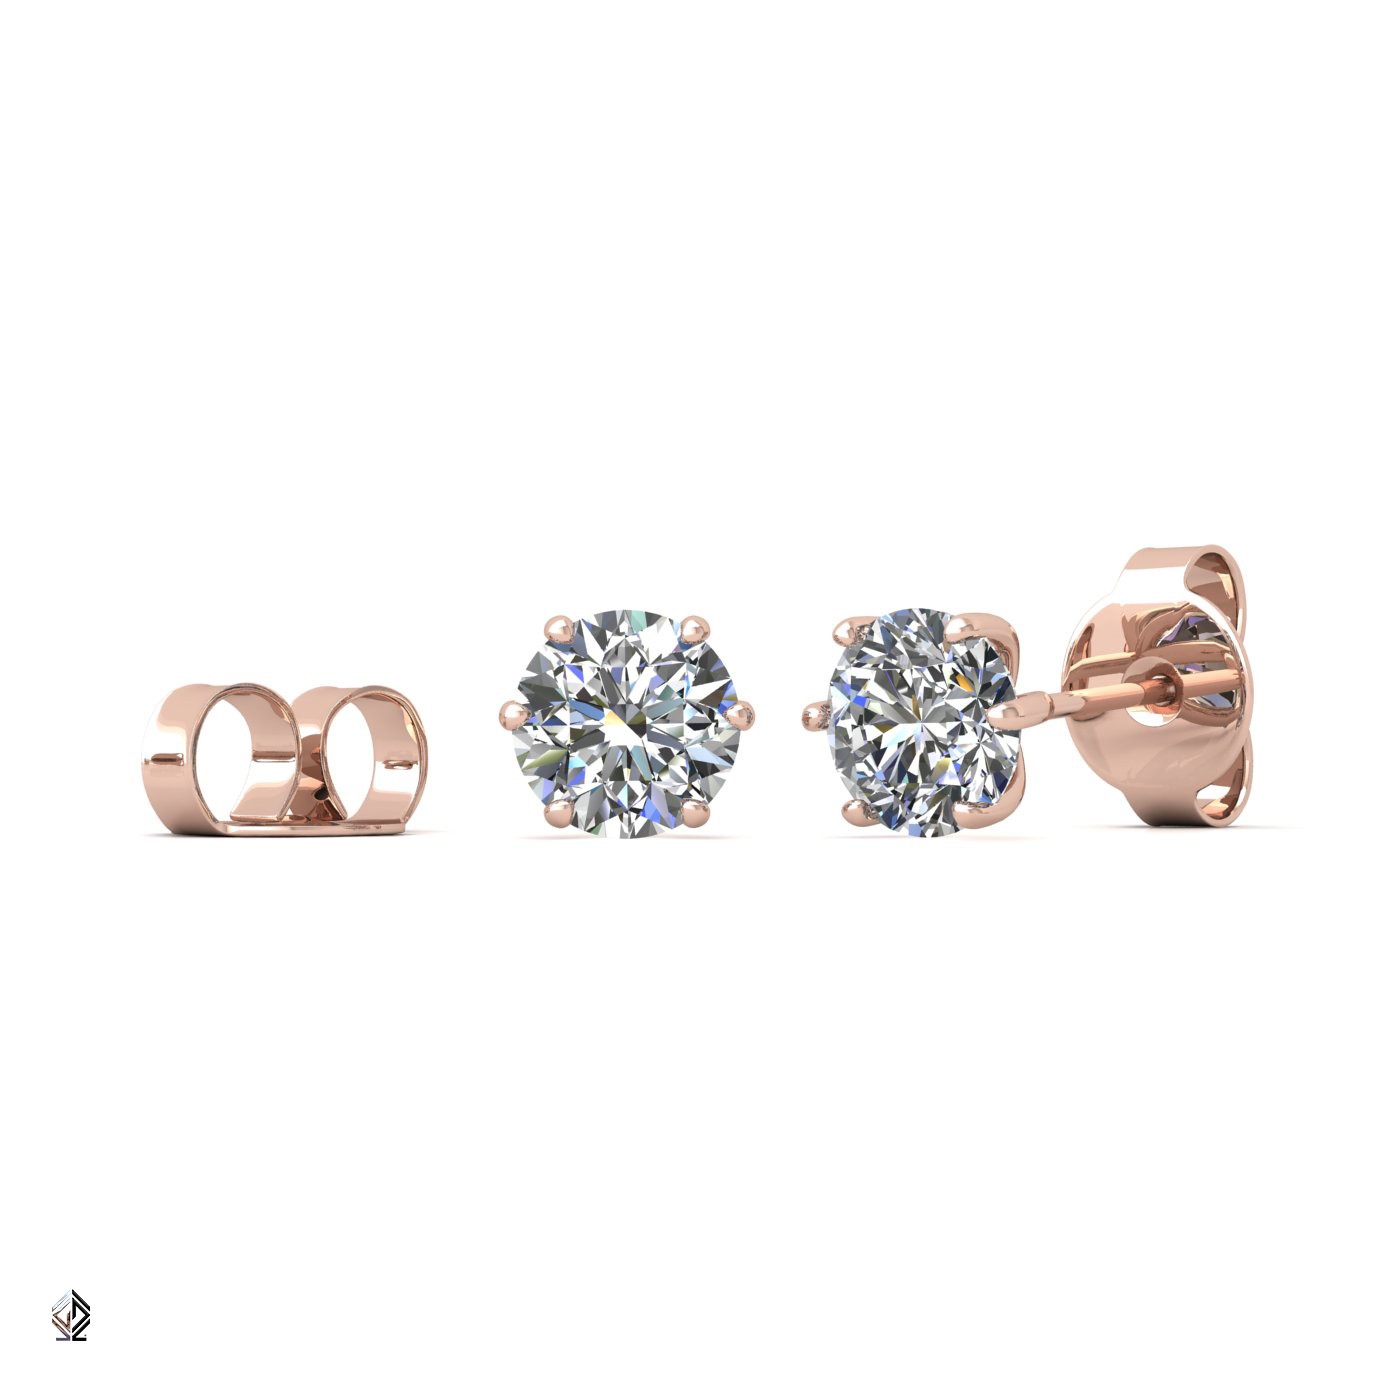 18k rose gold 1.2 ct each (2,4 tcw) 6 prongs round shape diamond earrings Photos & images